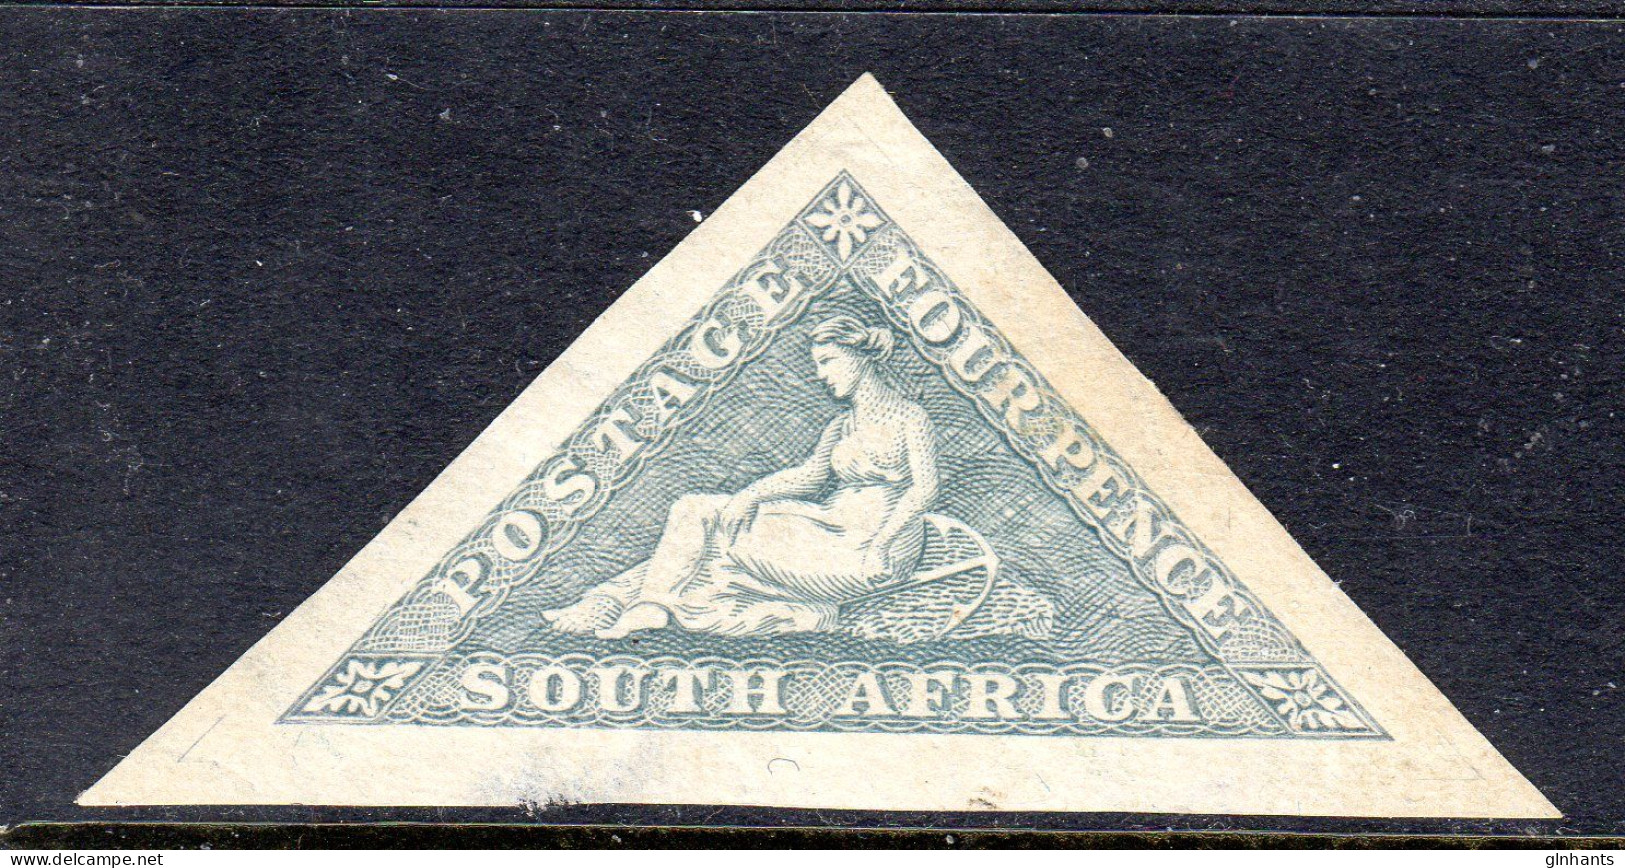 SOUTH AFRICA - 1926 HOPE 4d STAMP ENGLISH FINE  MOUNTED MINT MM * SG 33 - Ungebraucht